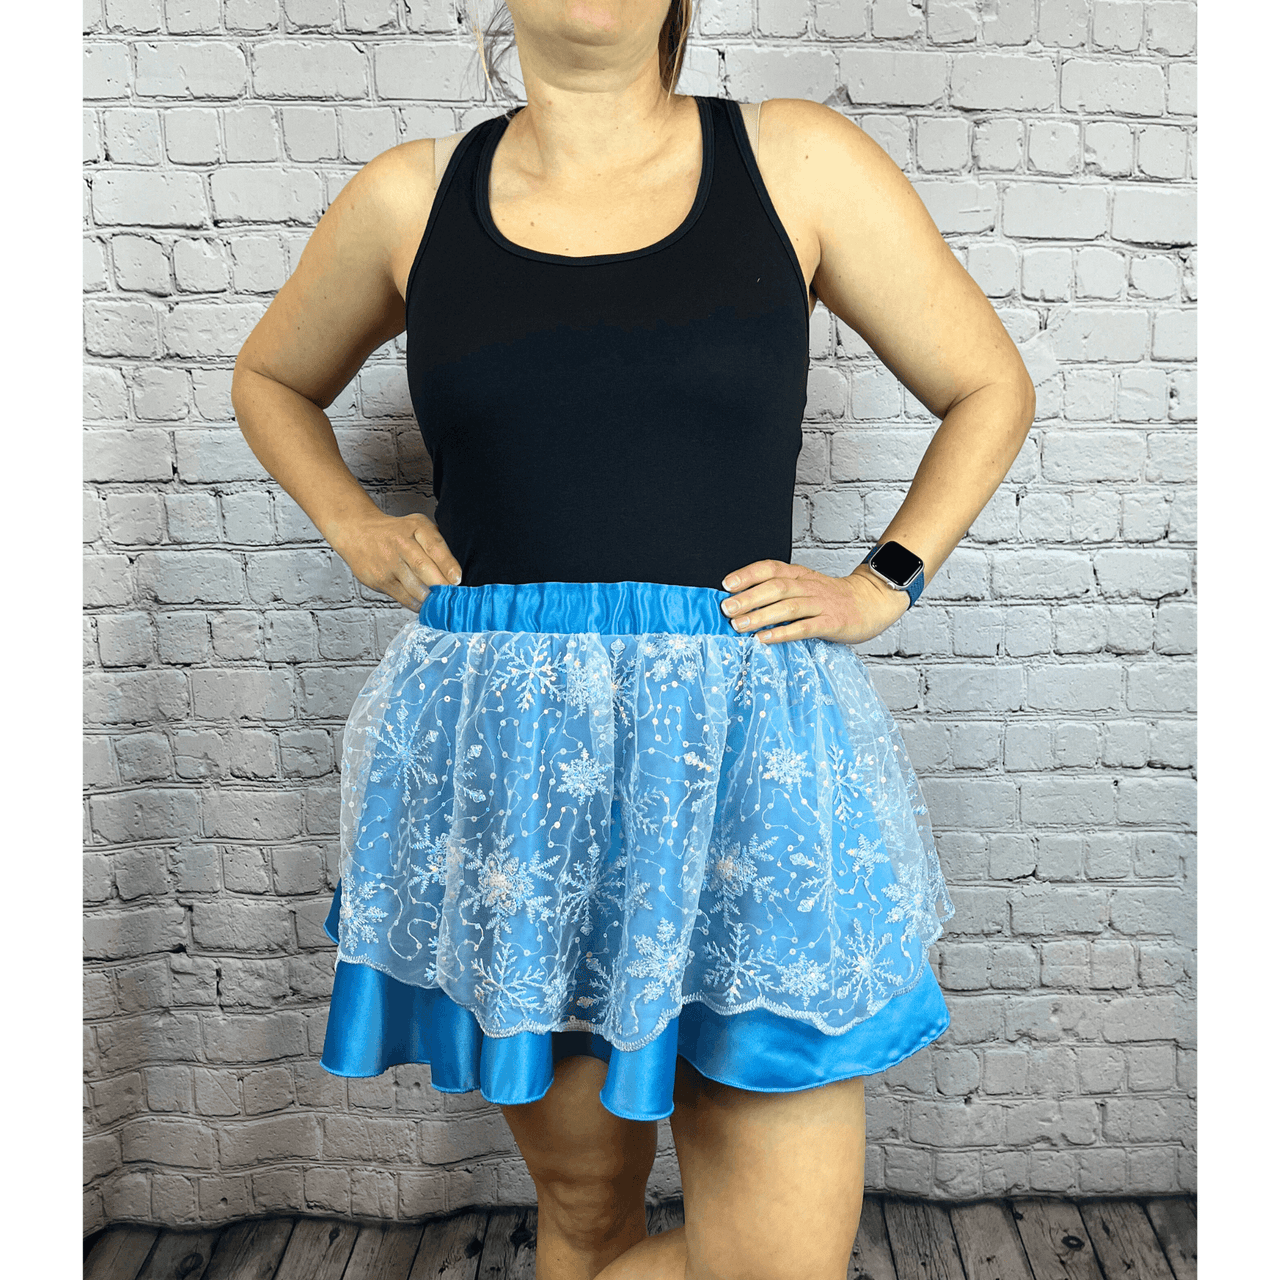 Snow Queen Snowflakes Royalty Skirt